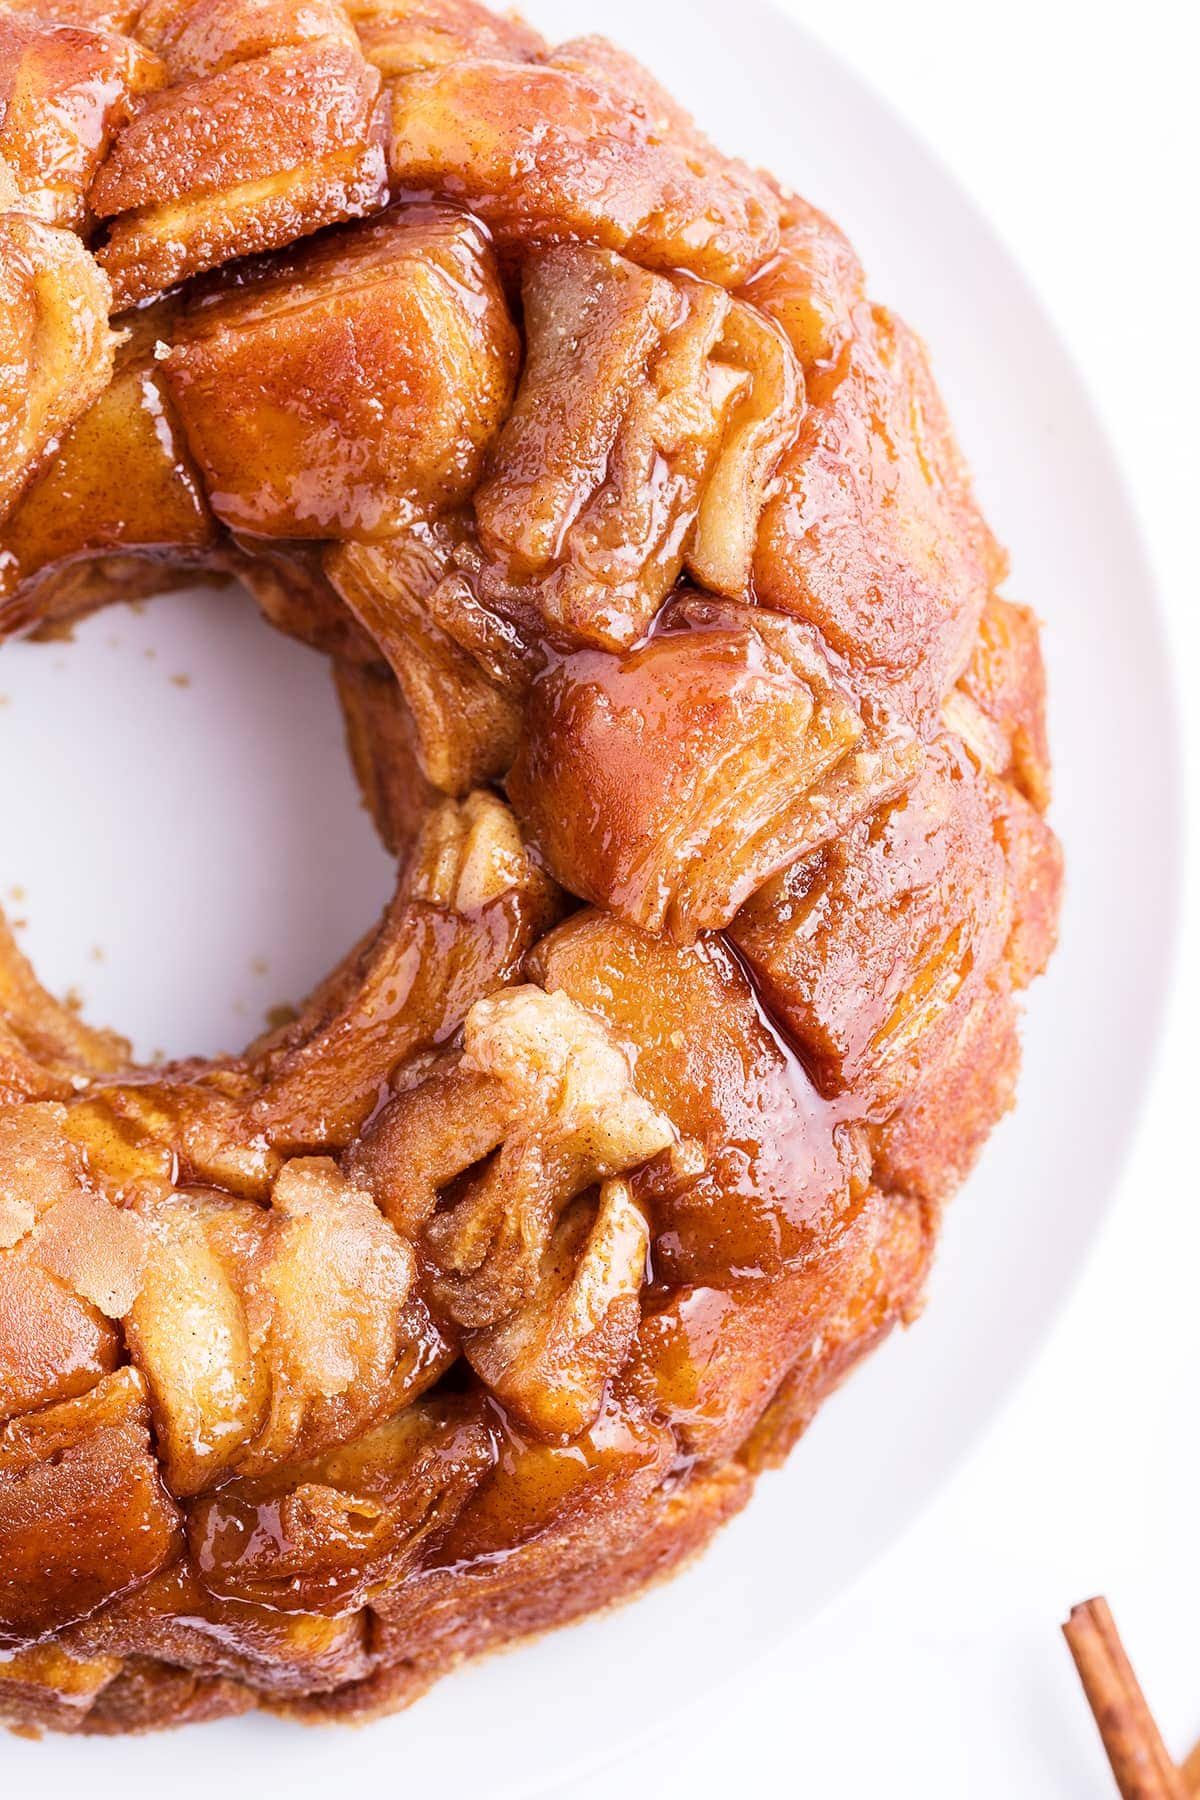 Monkey bread on a white plate, showing the pull apart pieces covered in caramel.